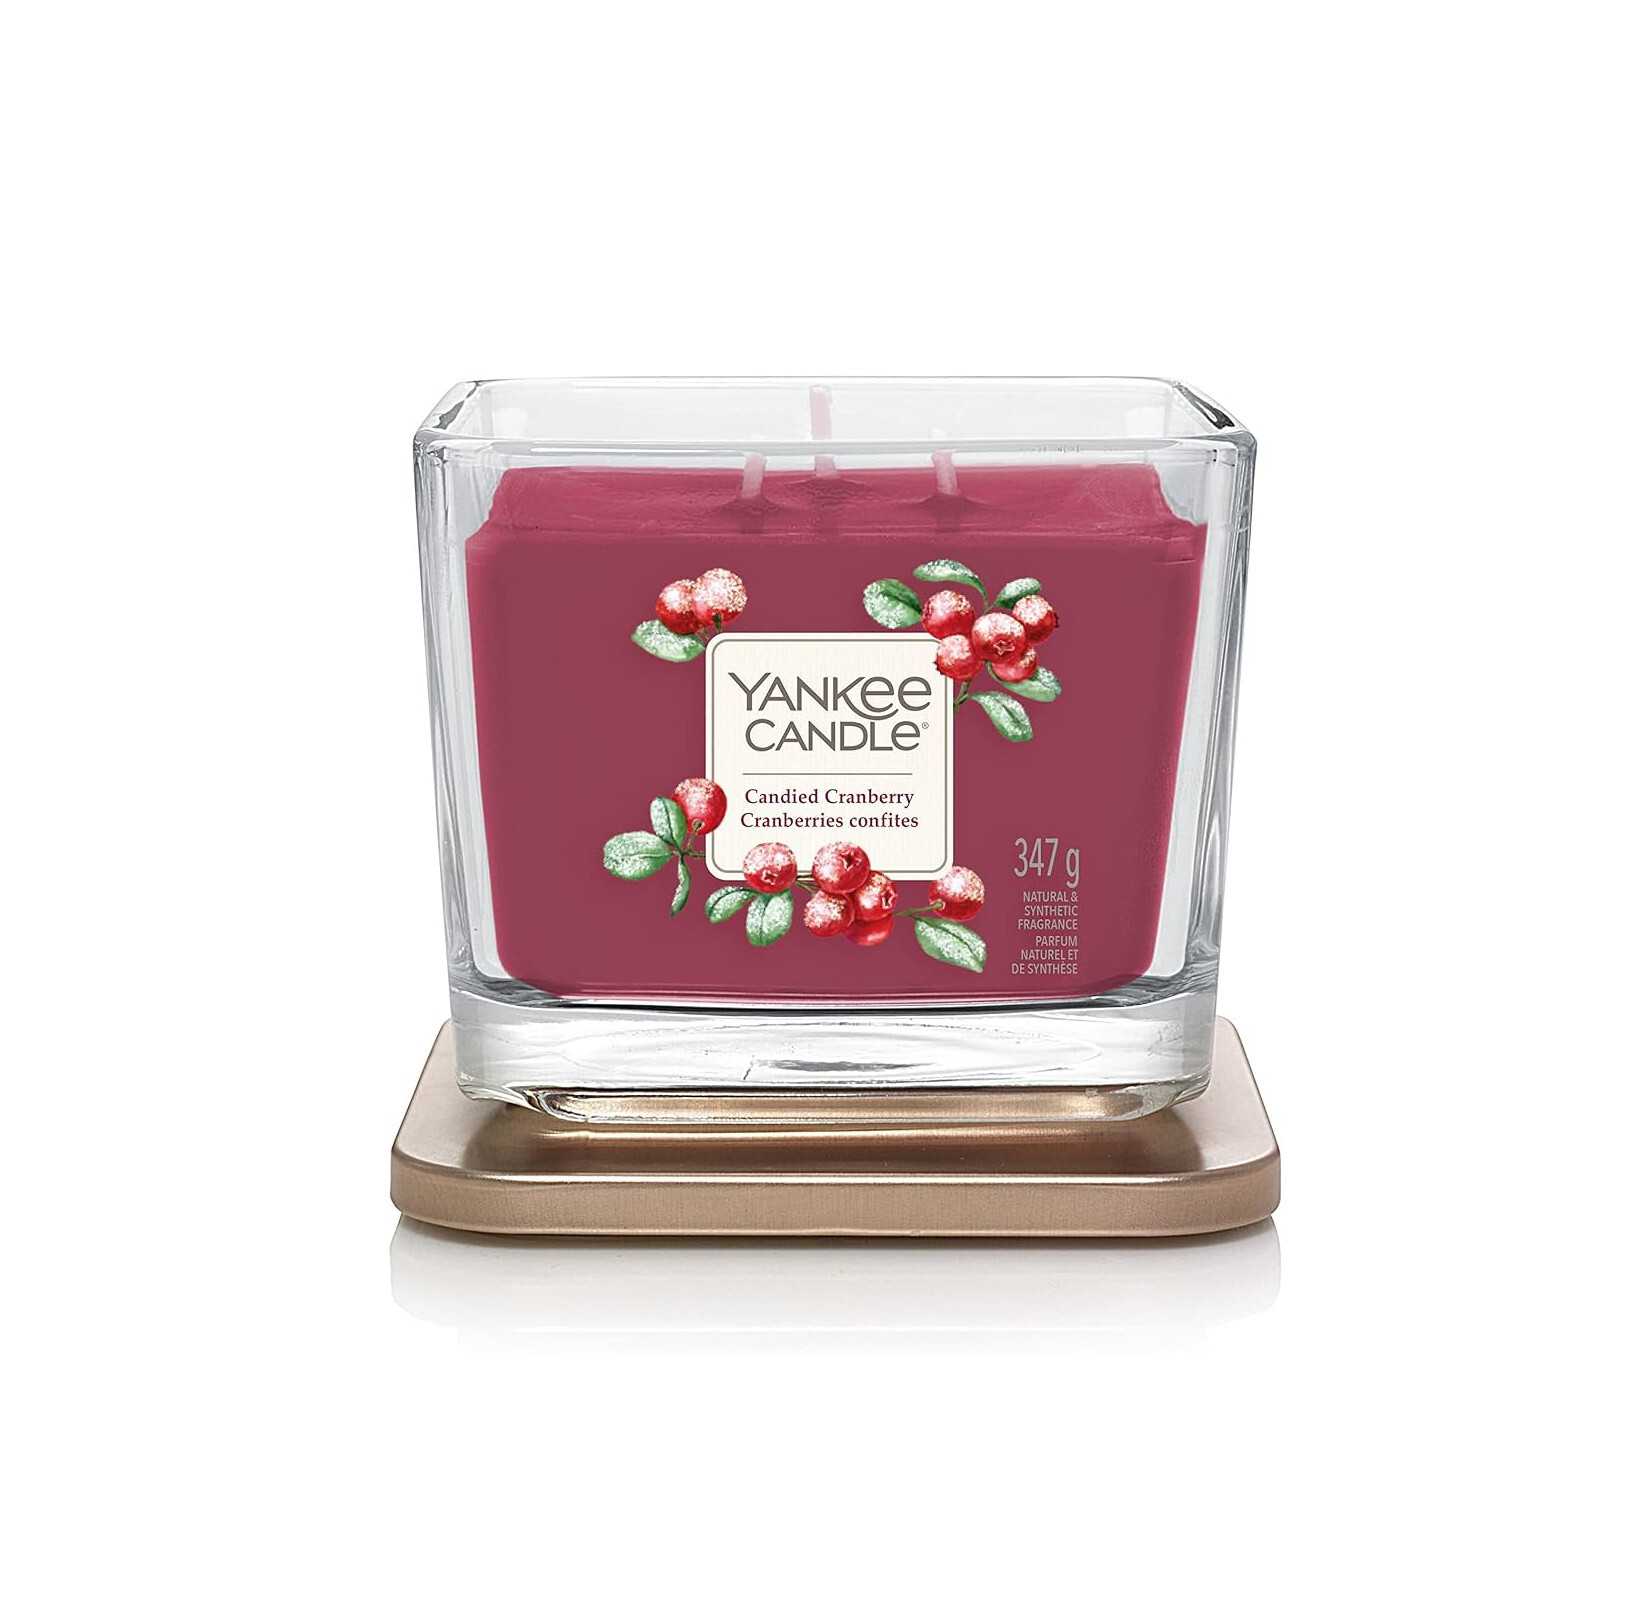 Yankee Candle Candied Cranberry Medium